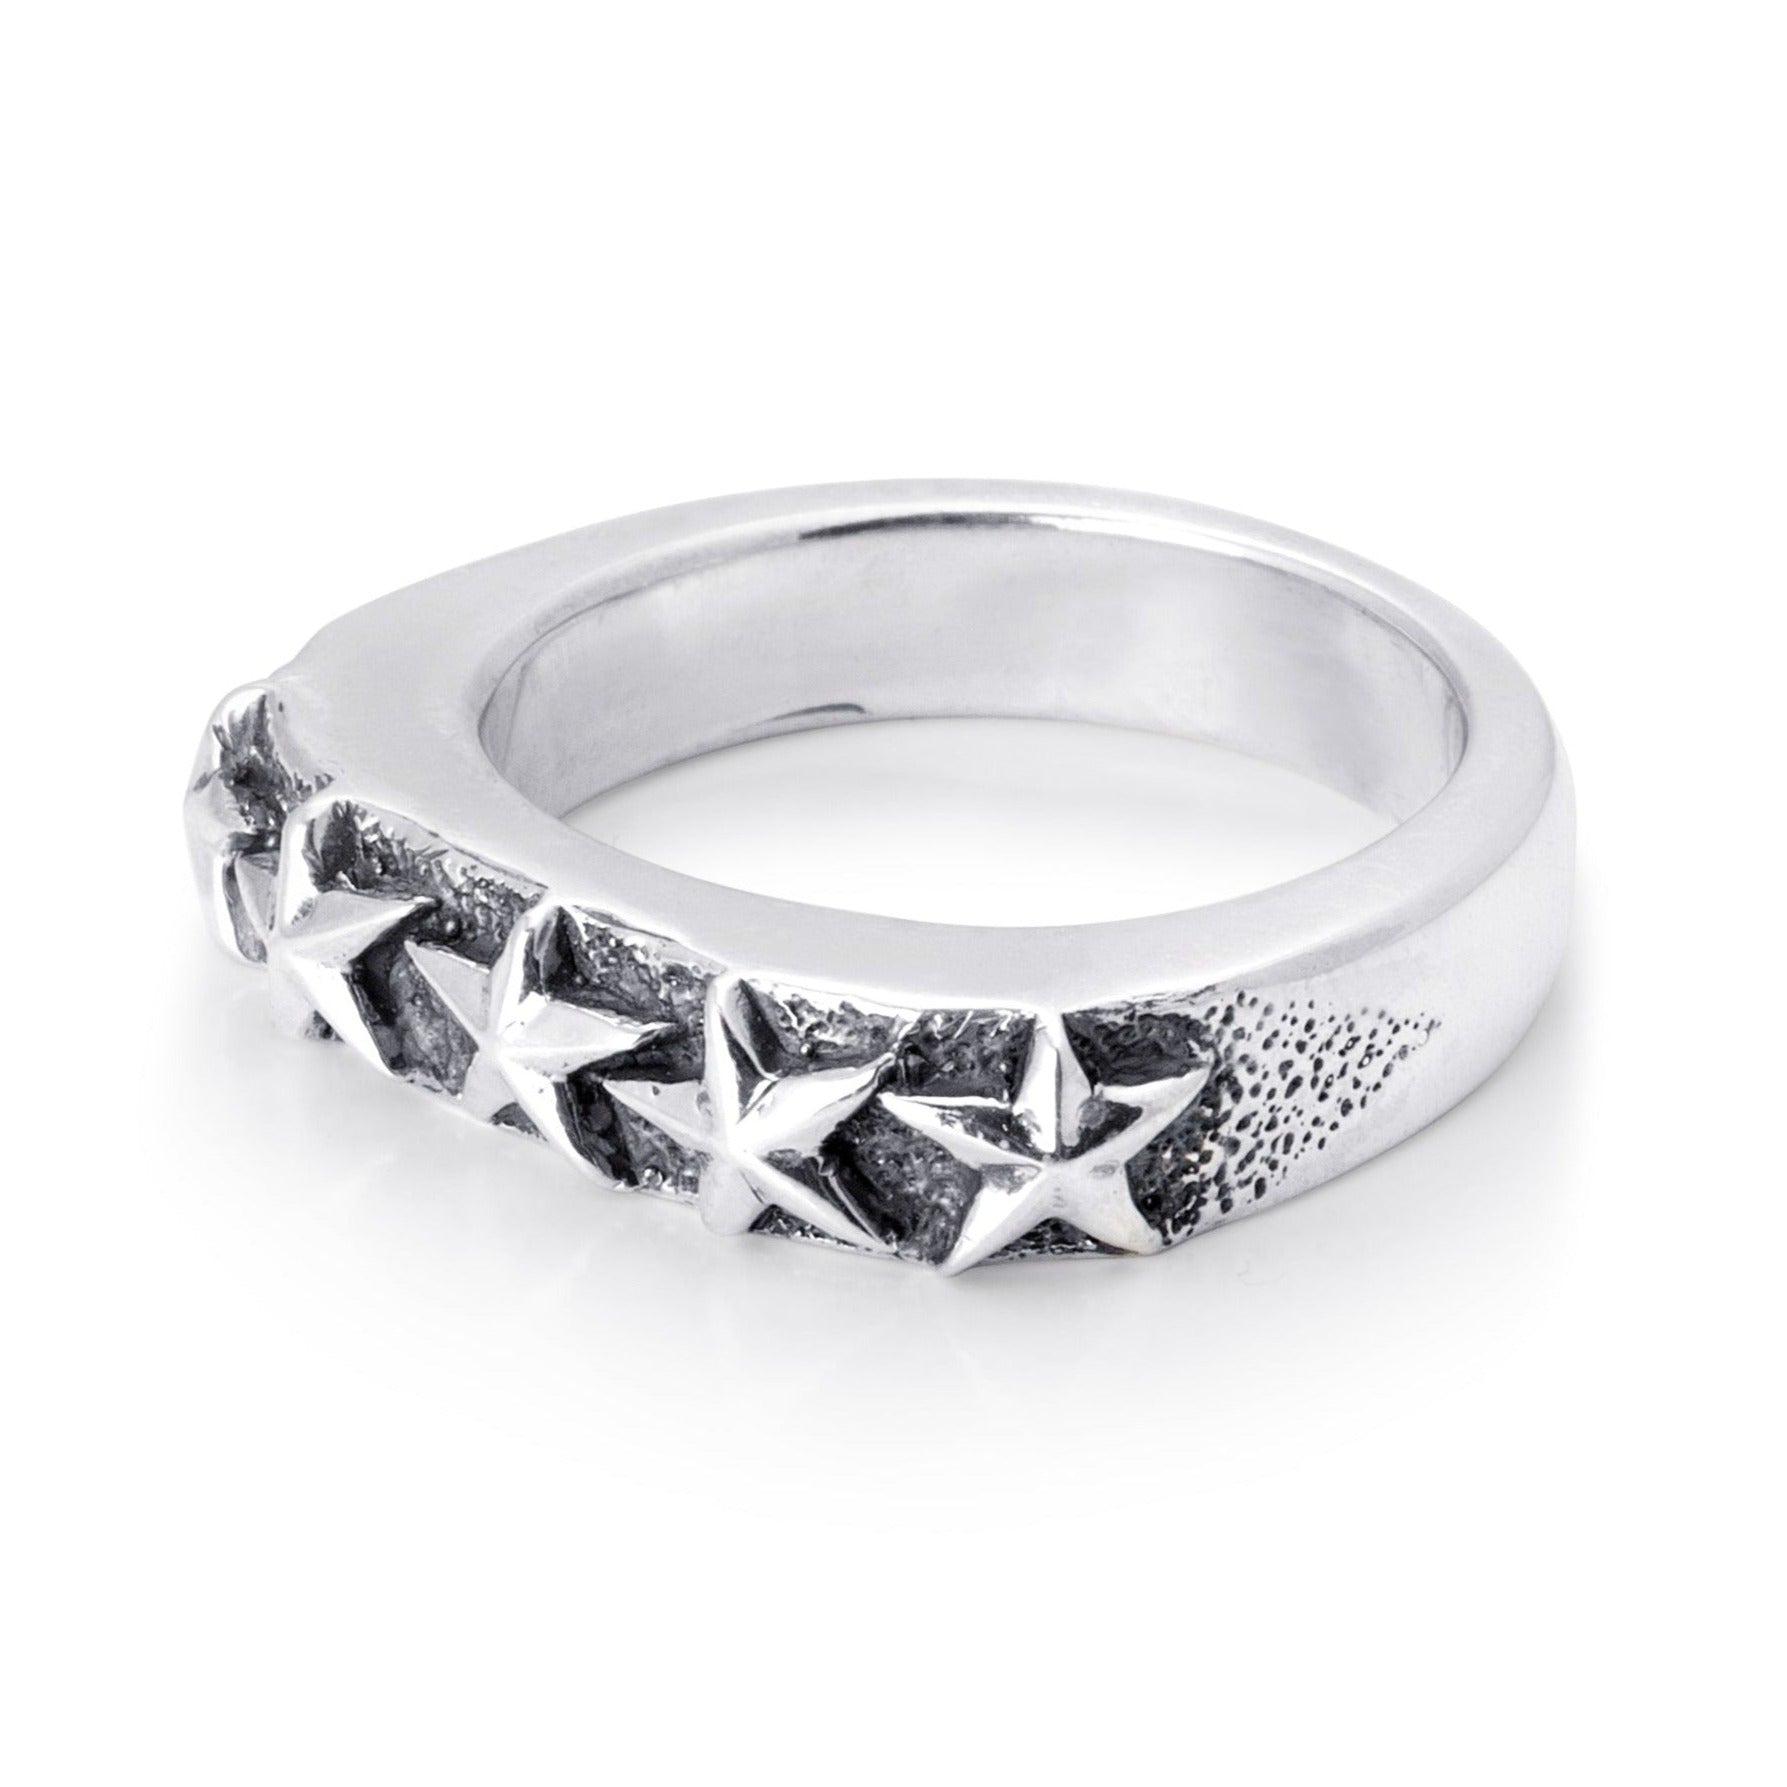 Solid sterling silver band with five stars exposed on the top. Pitting surrounds the stars on the top. 45 degree view of the Ring